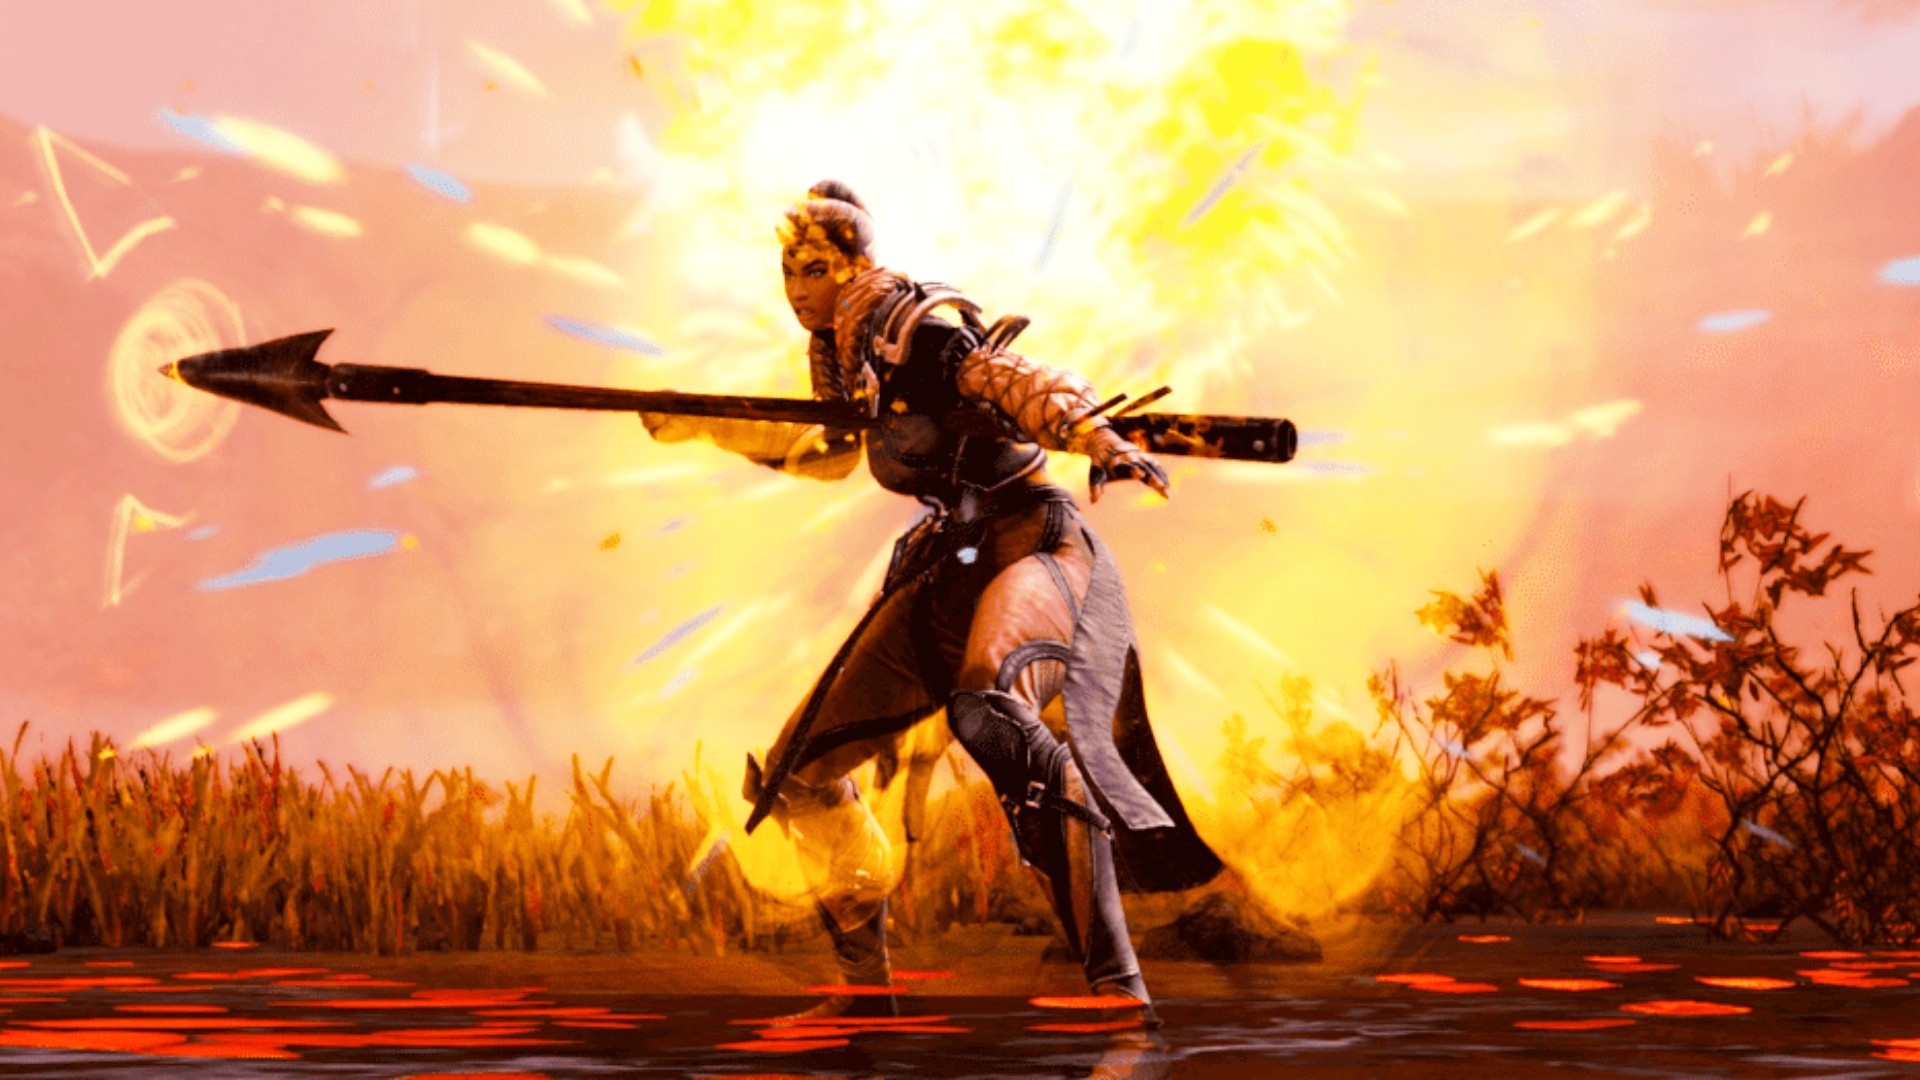 New Guild Wars 2 expansion coming soon, with first new raid since 2019